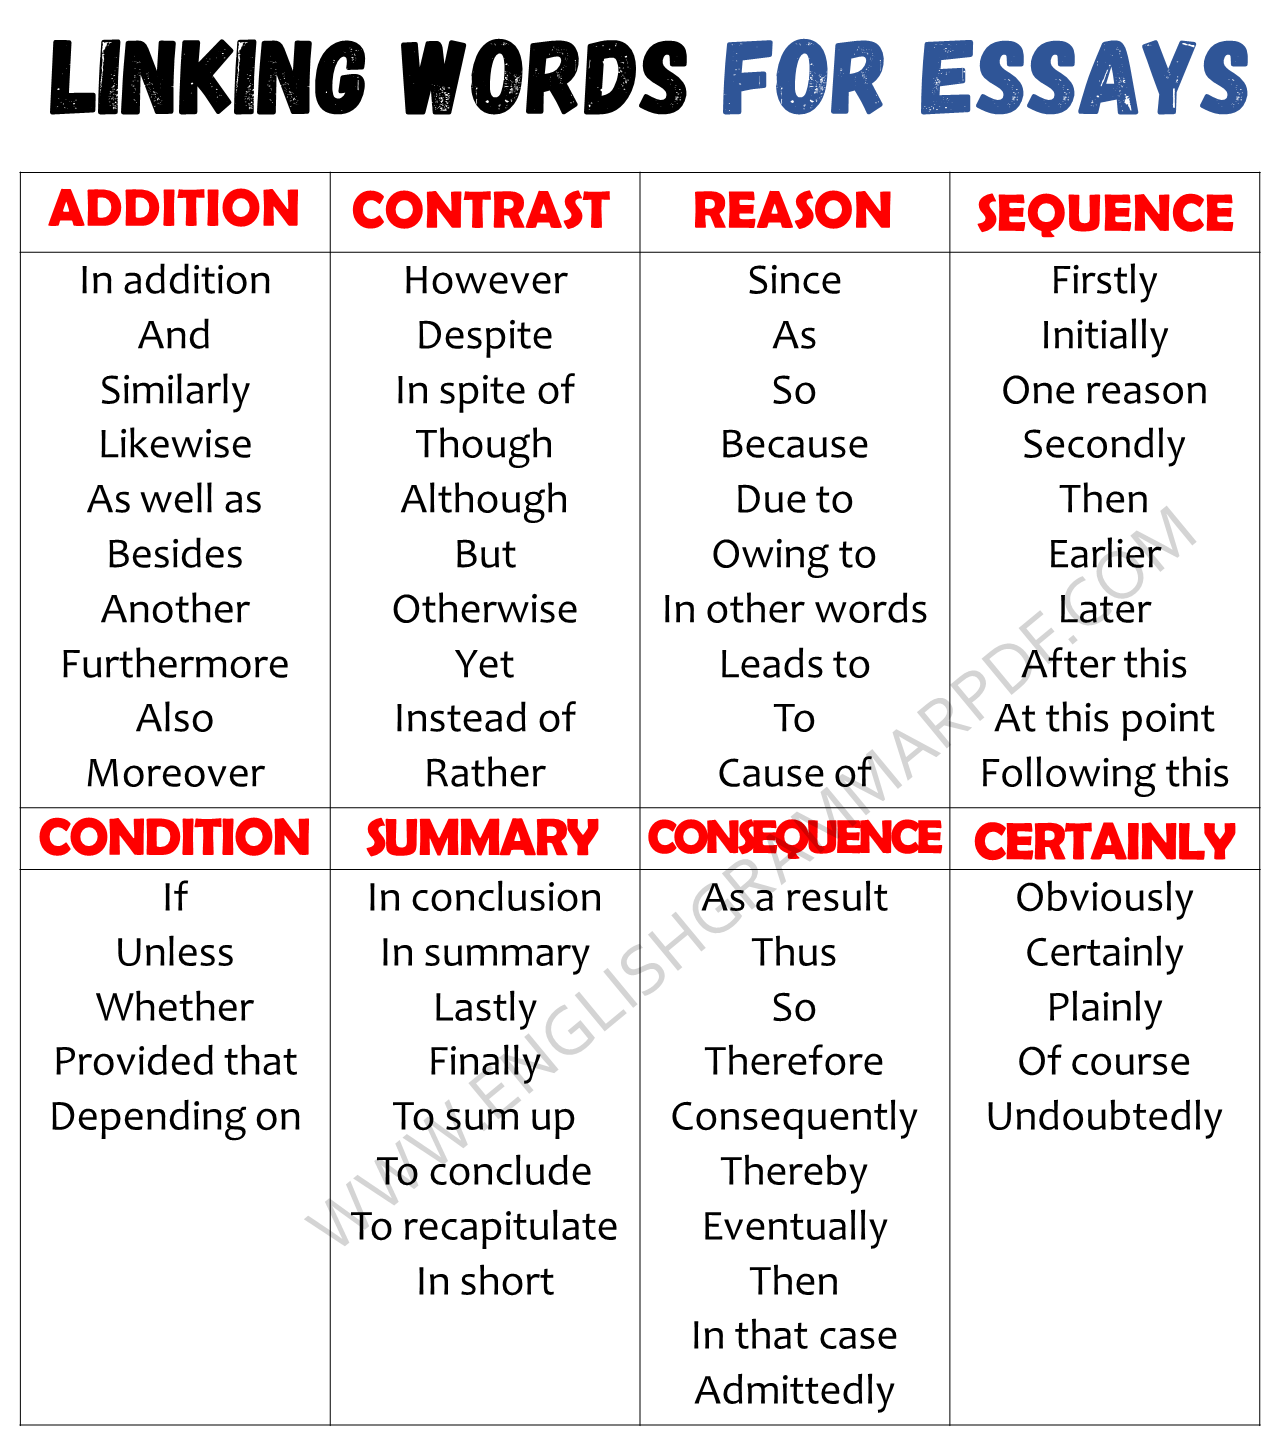 Linking Words for Essays